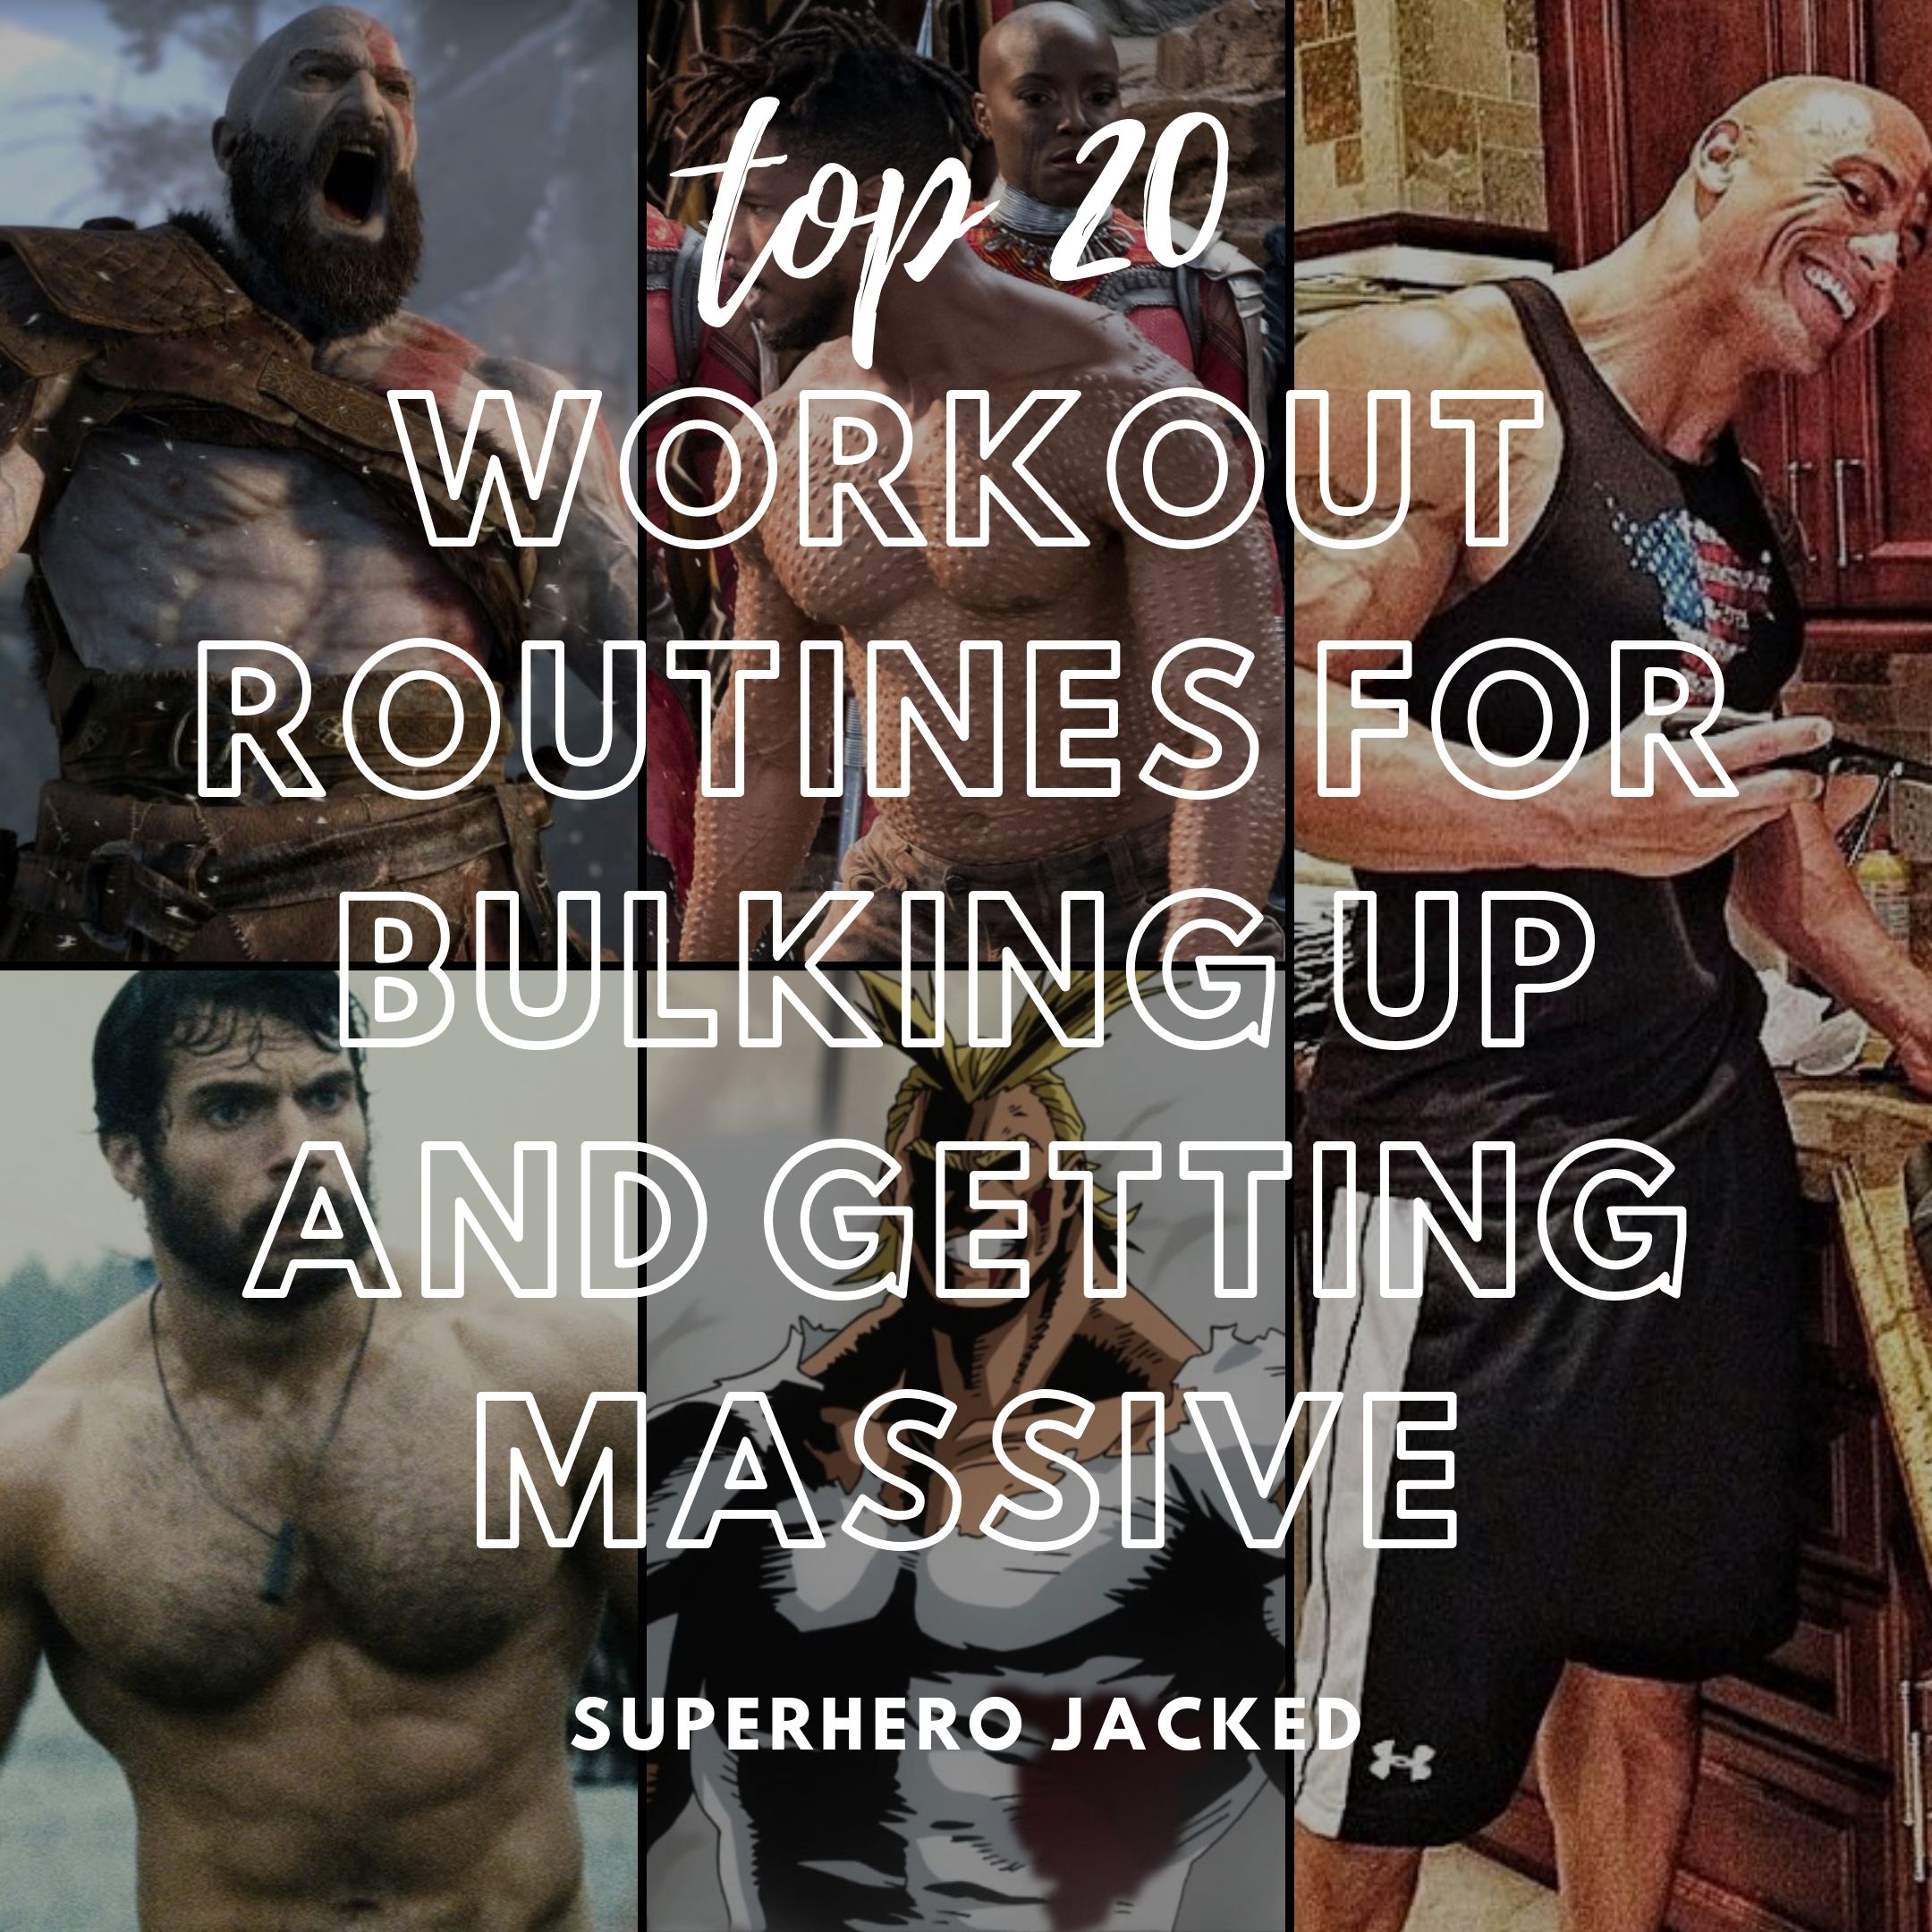 Are superherojacked workouts good? : r/workouts